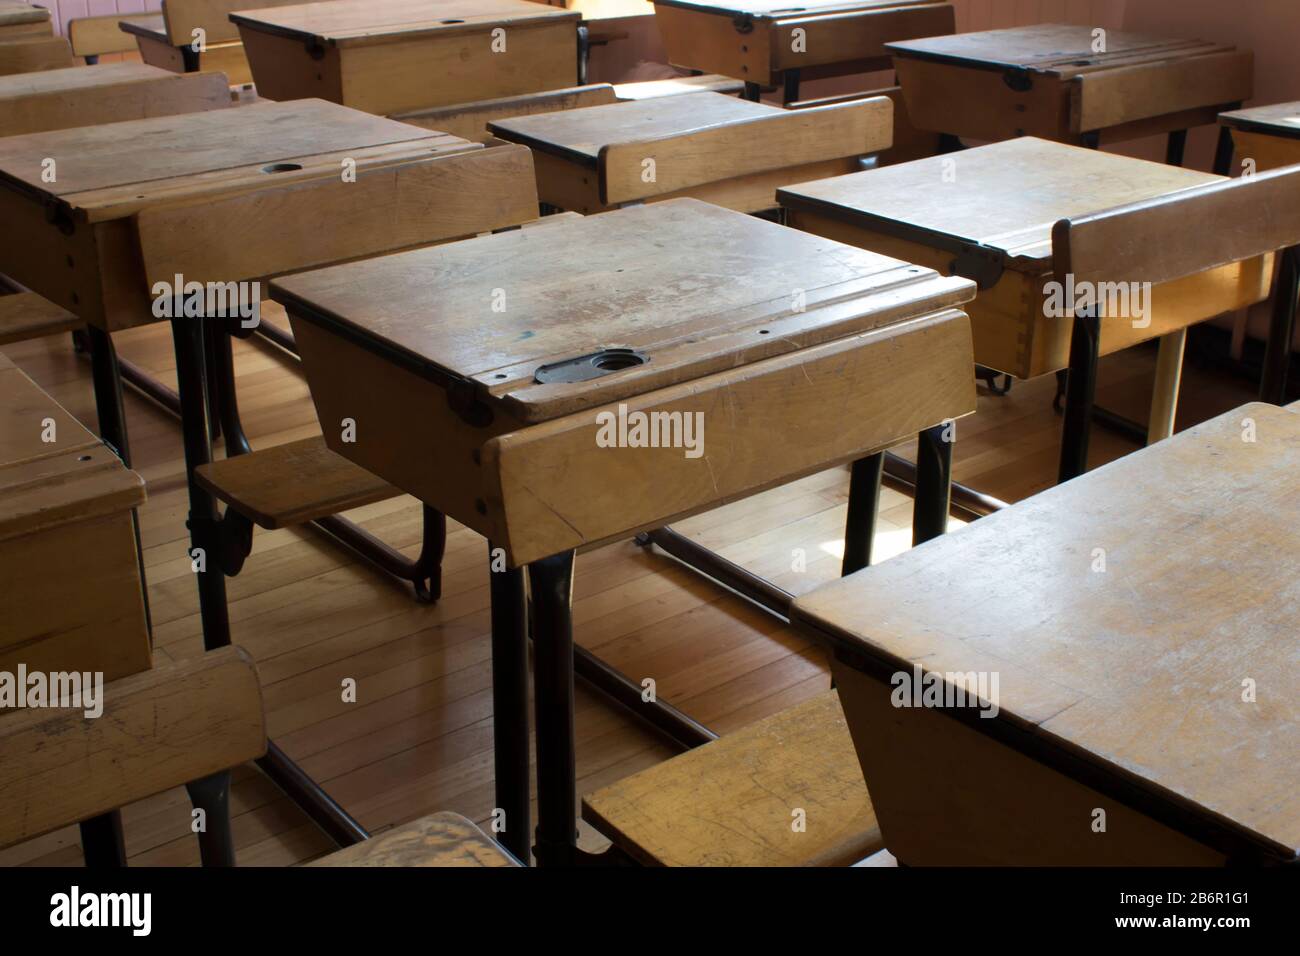 Rows Of Old Fashioned School Desks In A Classroom In Day Light